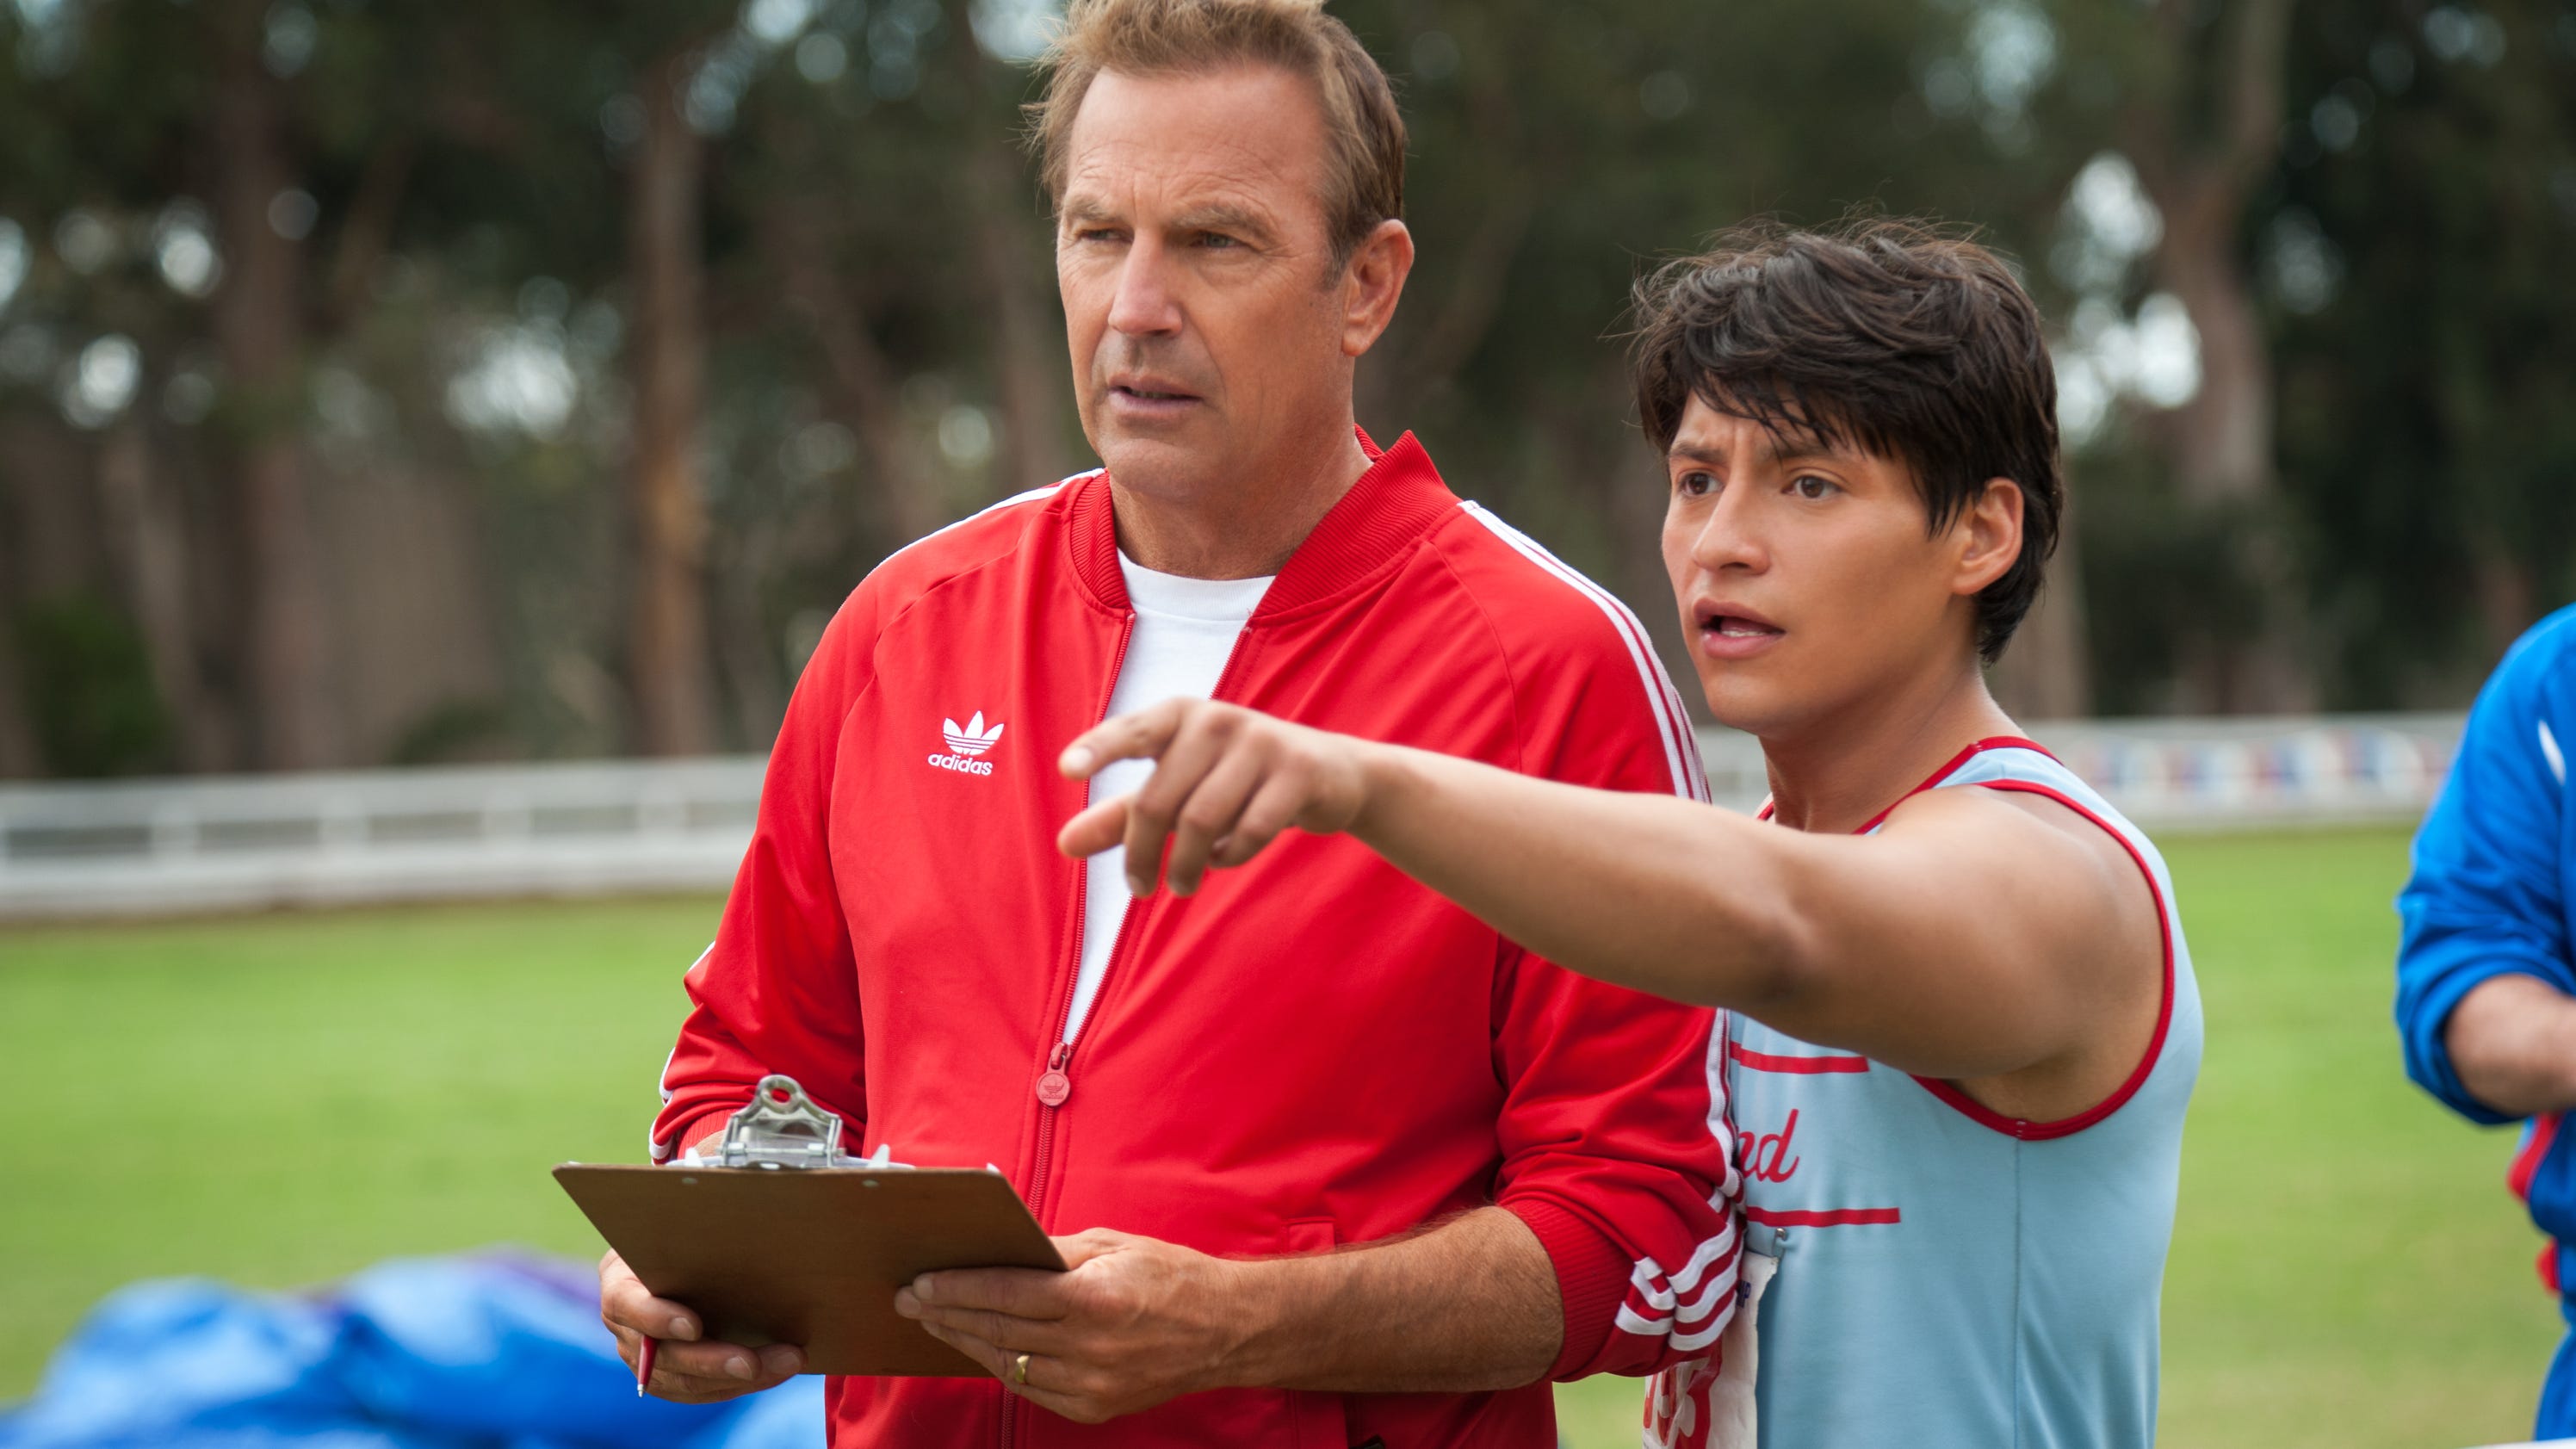 REVIEW: McFarland USA not just for kids